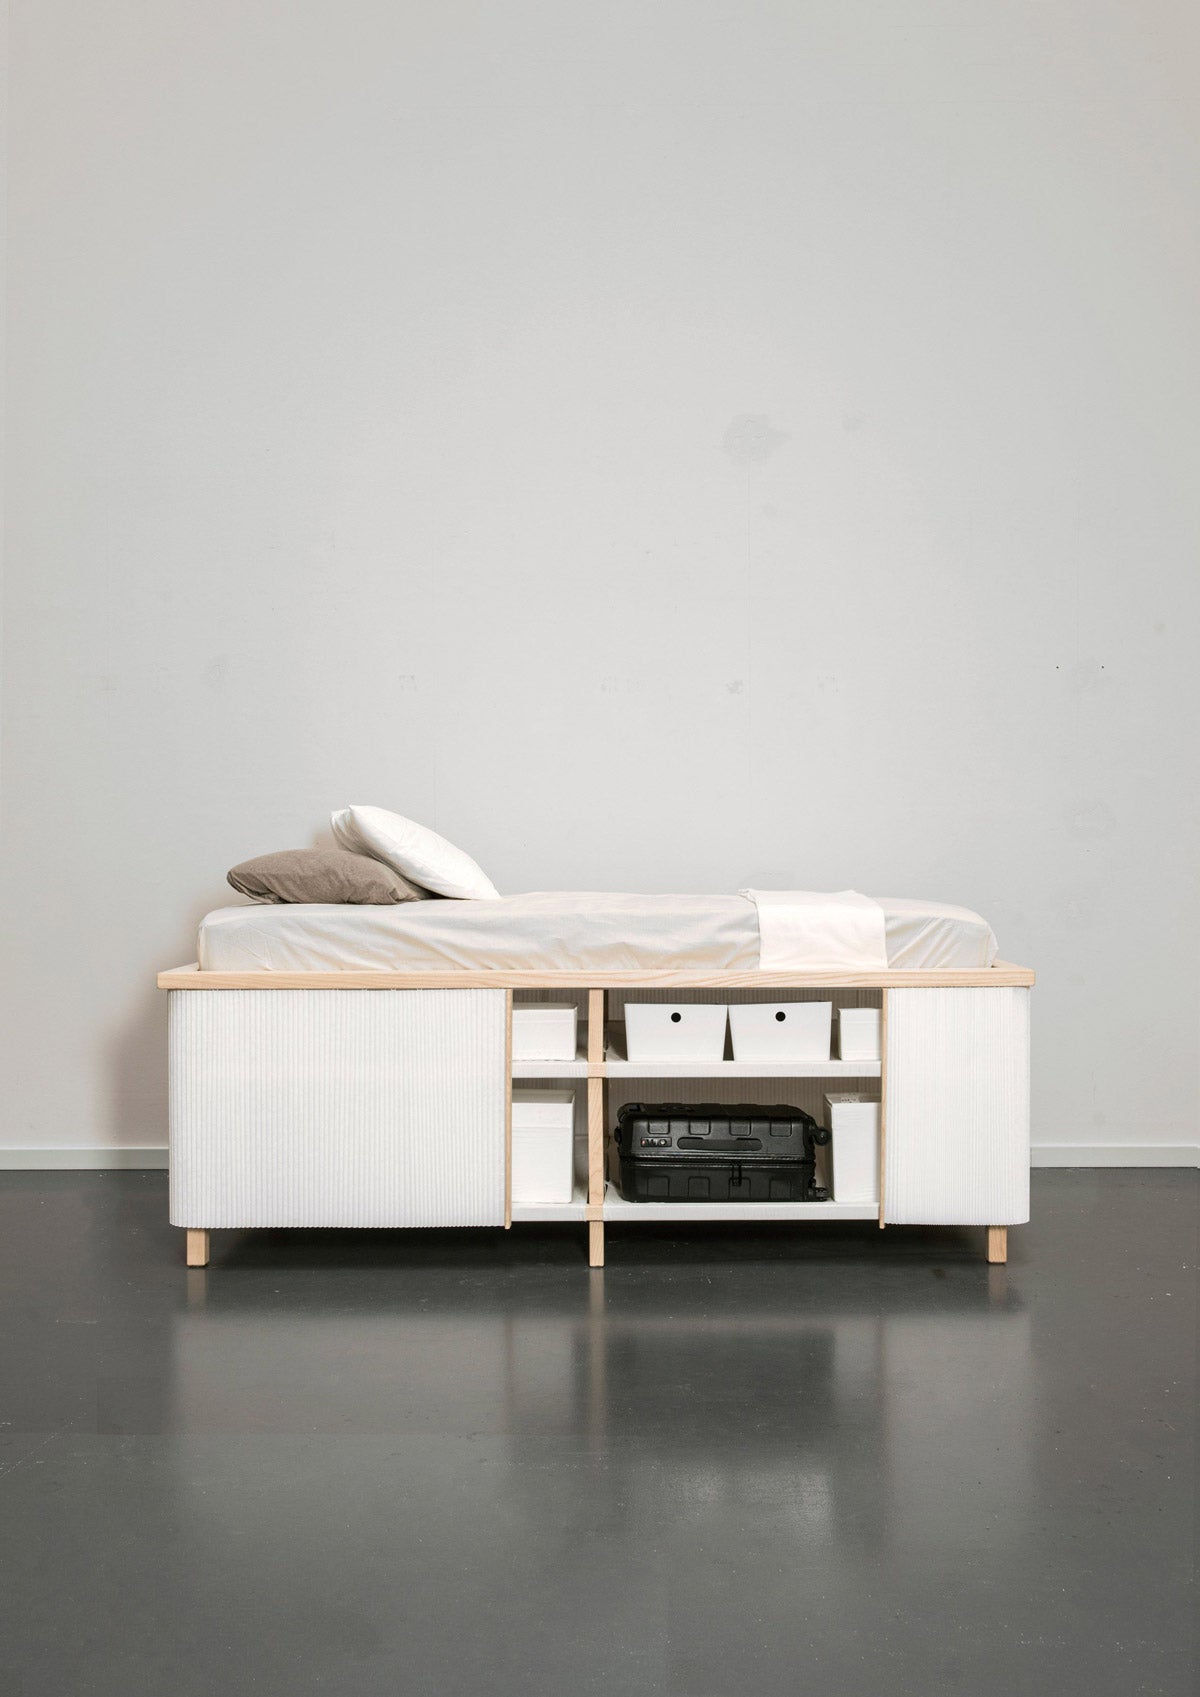 Tiny Home Bed (Photo: Yesul Jang)